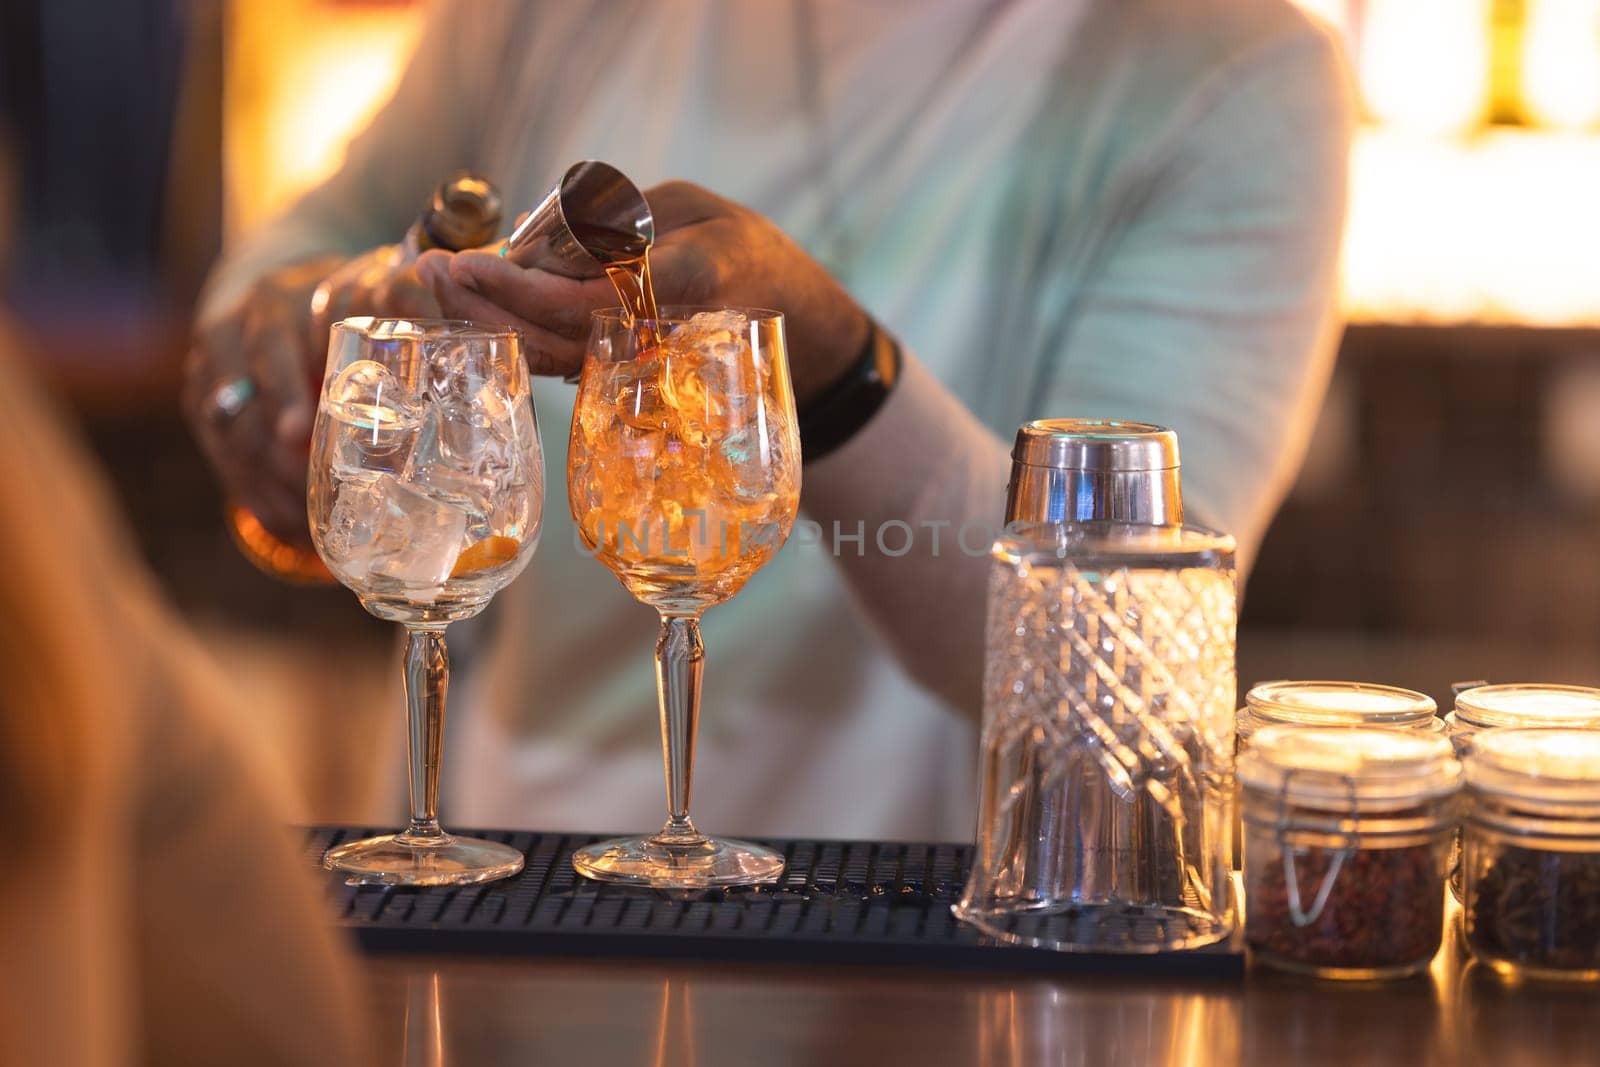 A bartender is pouring a drink into two wine glasses by Studia72